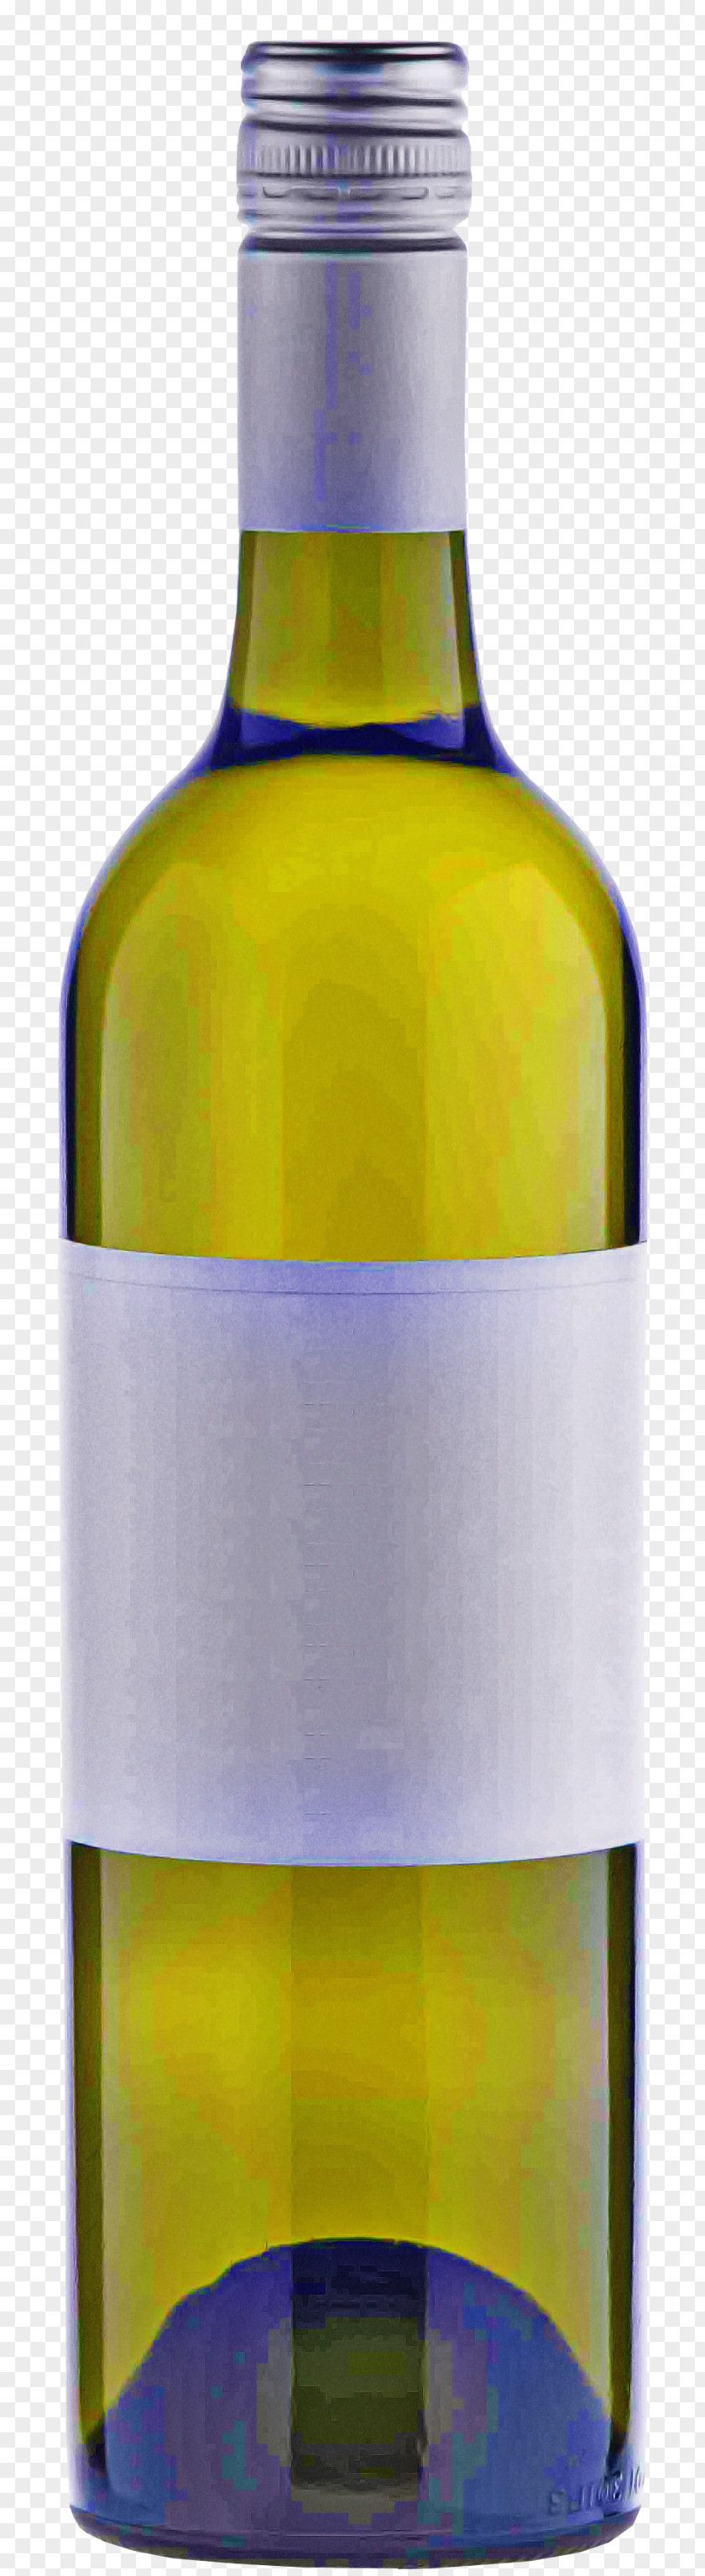 Glass Bottle White Wine PNG